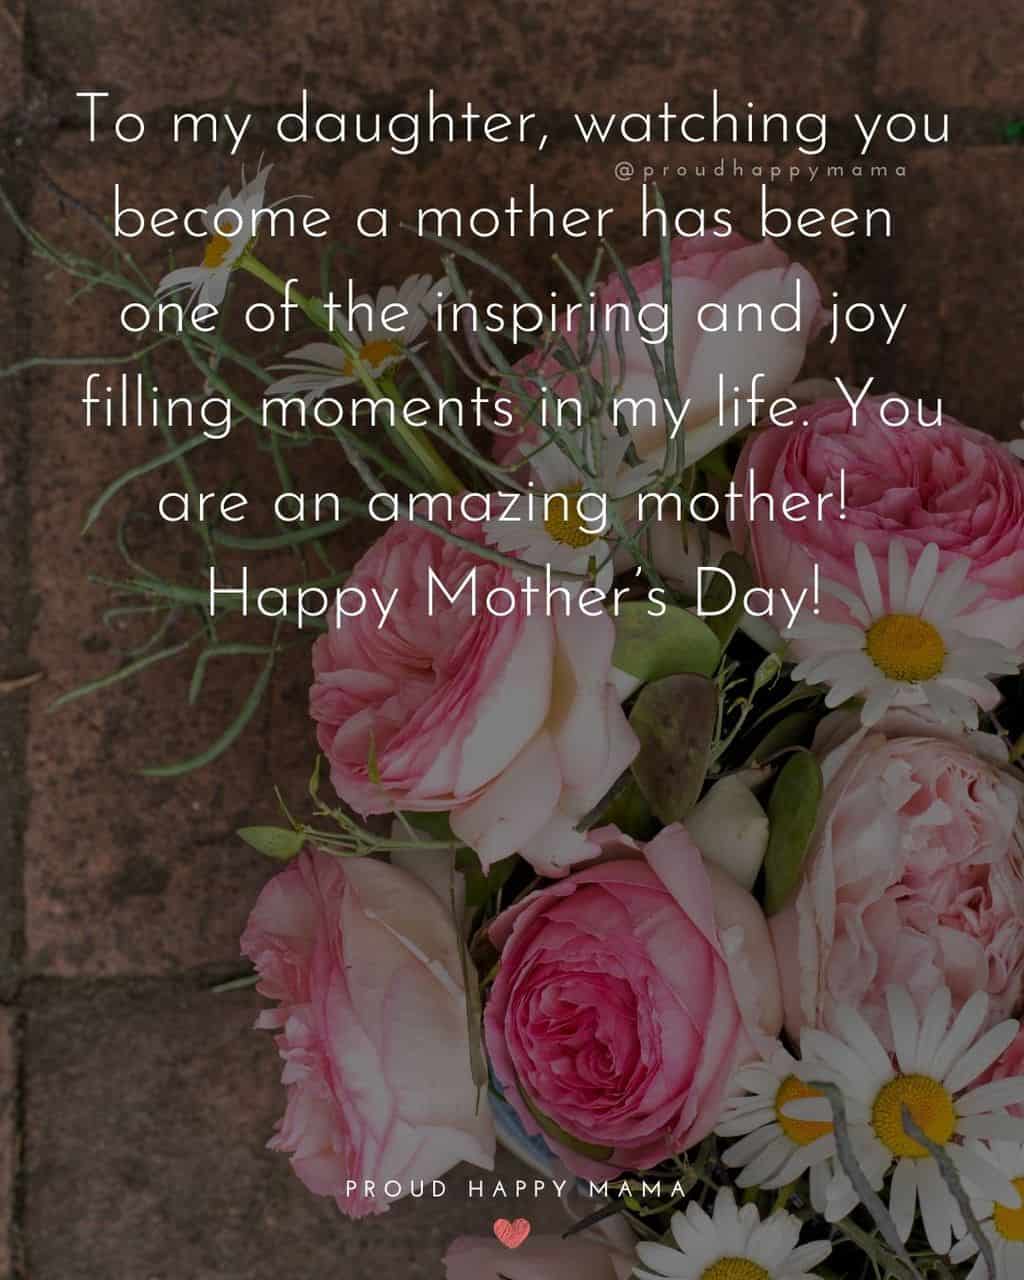 Happy Mothers Day Quotes To Daughter - To my daughter, watching you become a mother has been one of the inspiring and joy filling